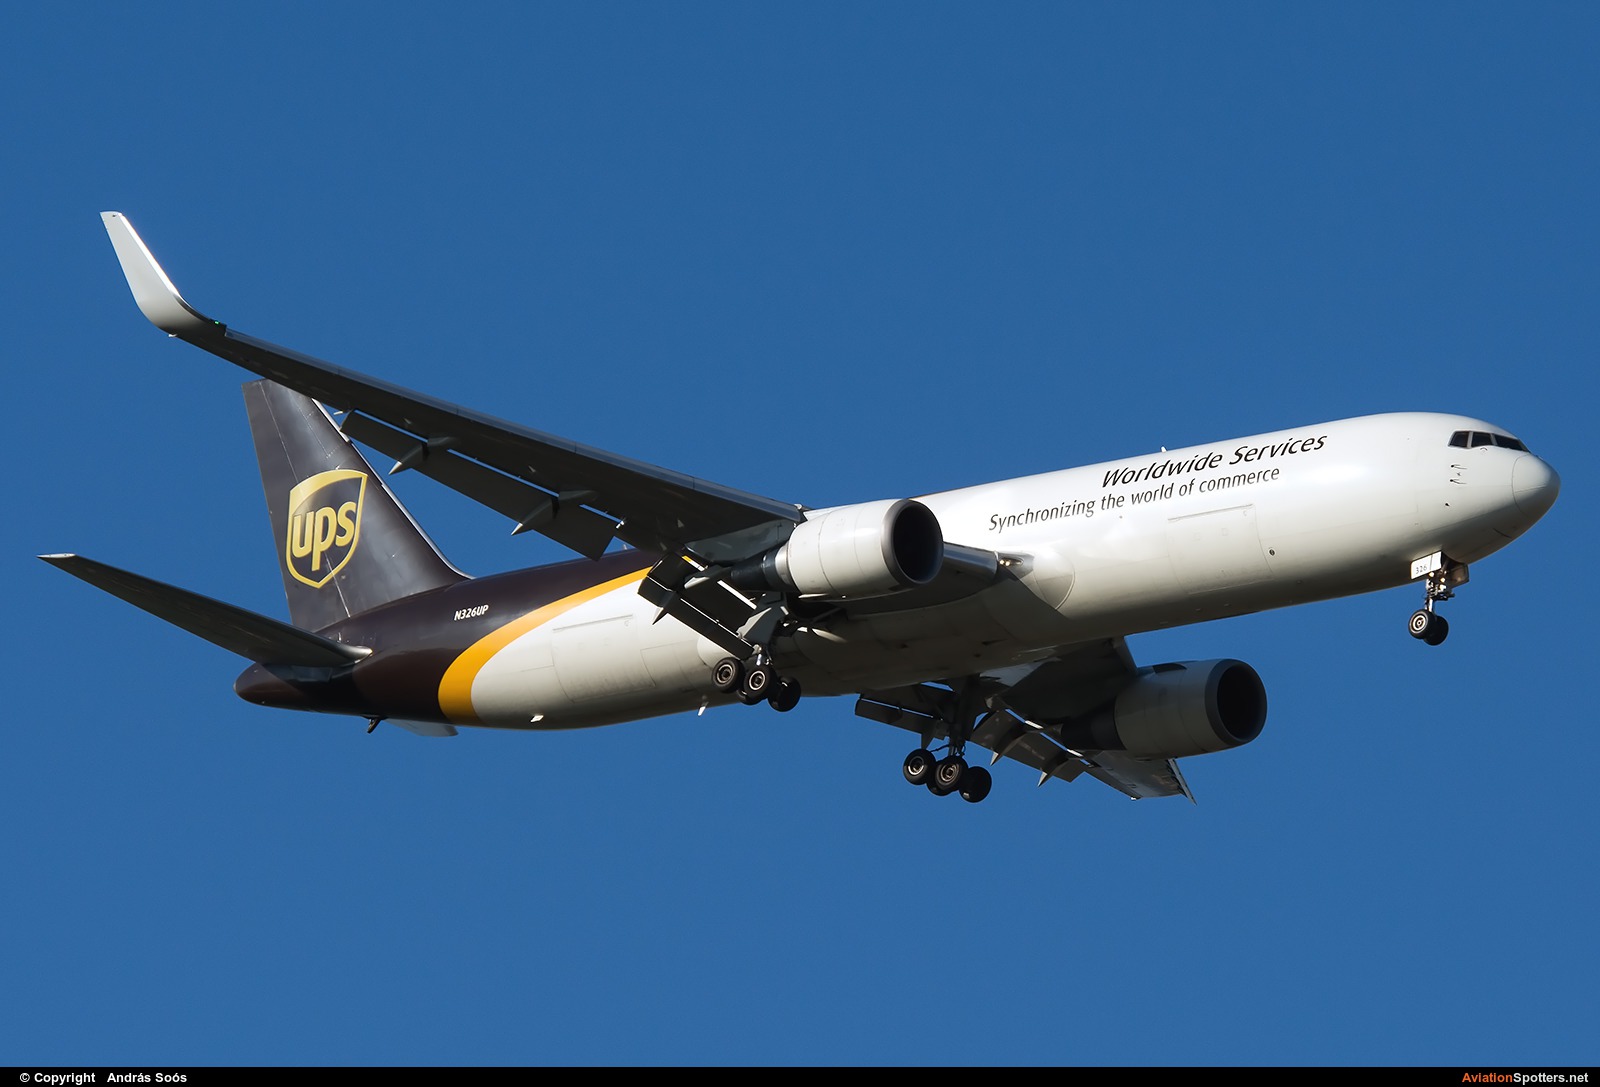 UPS - United Parcel Service  -  767-300F  (N326UP) By András Soós (sas1965)